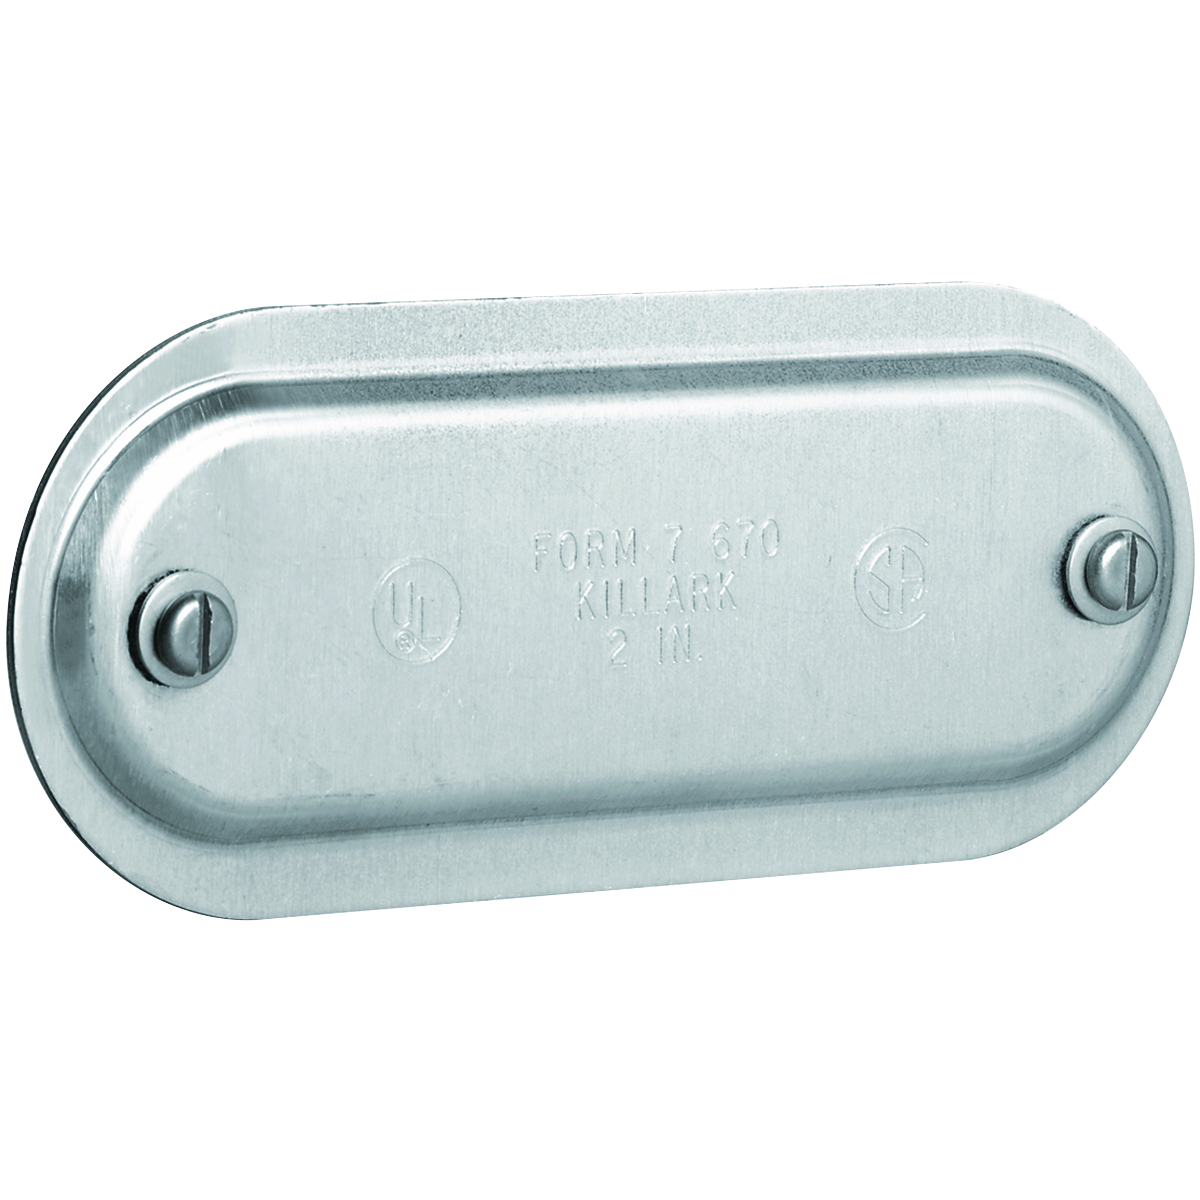 DURALOY 7 SERIES - STAMPED STEEL CONDUIT BODY COVER - HUB SIZE 1 INCH